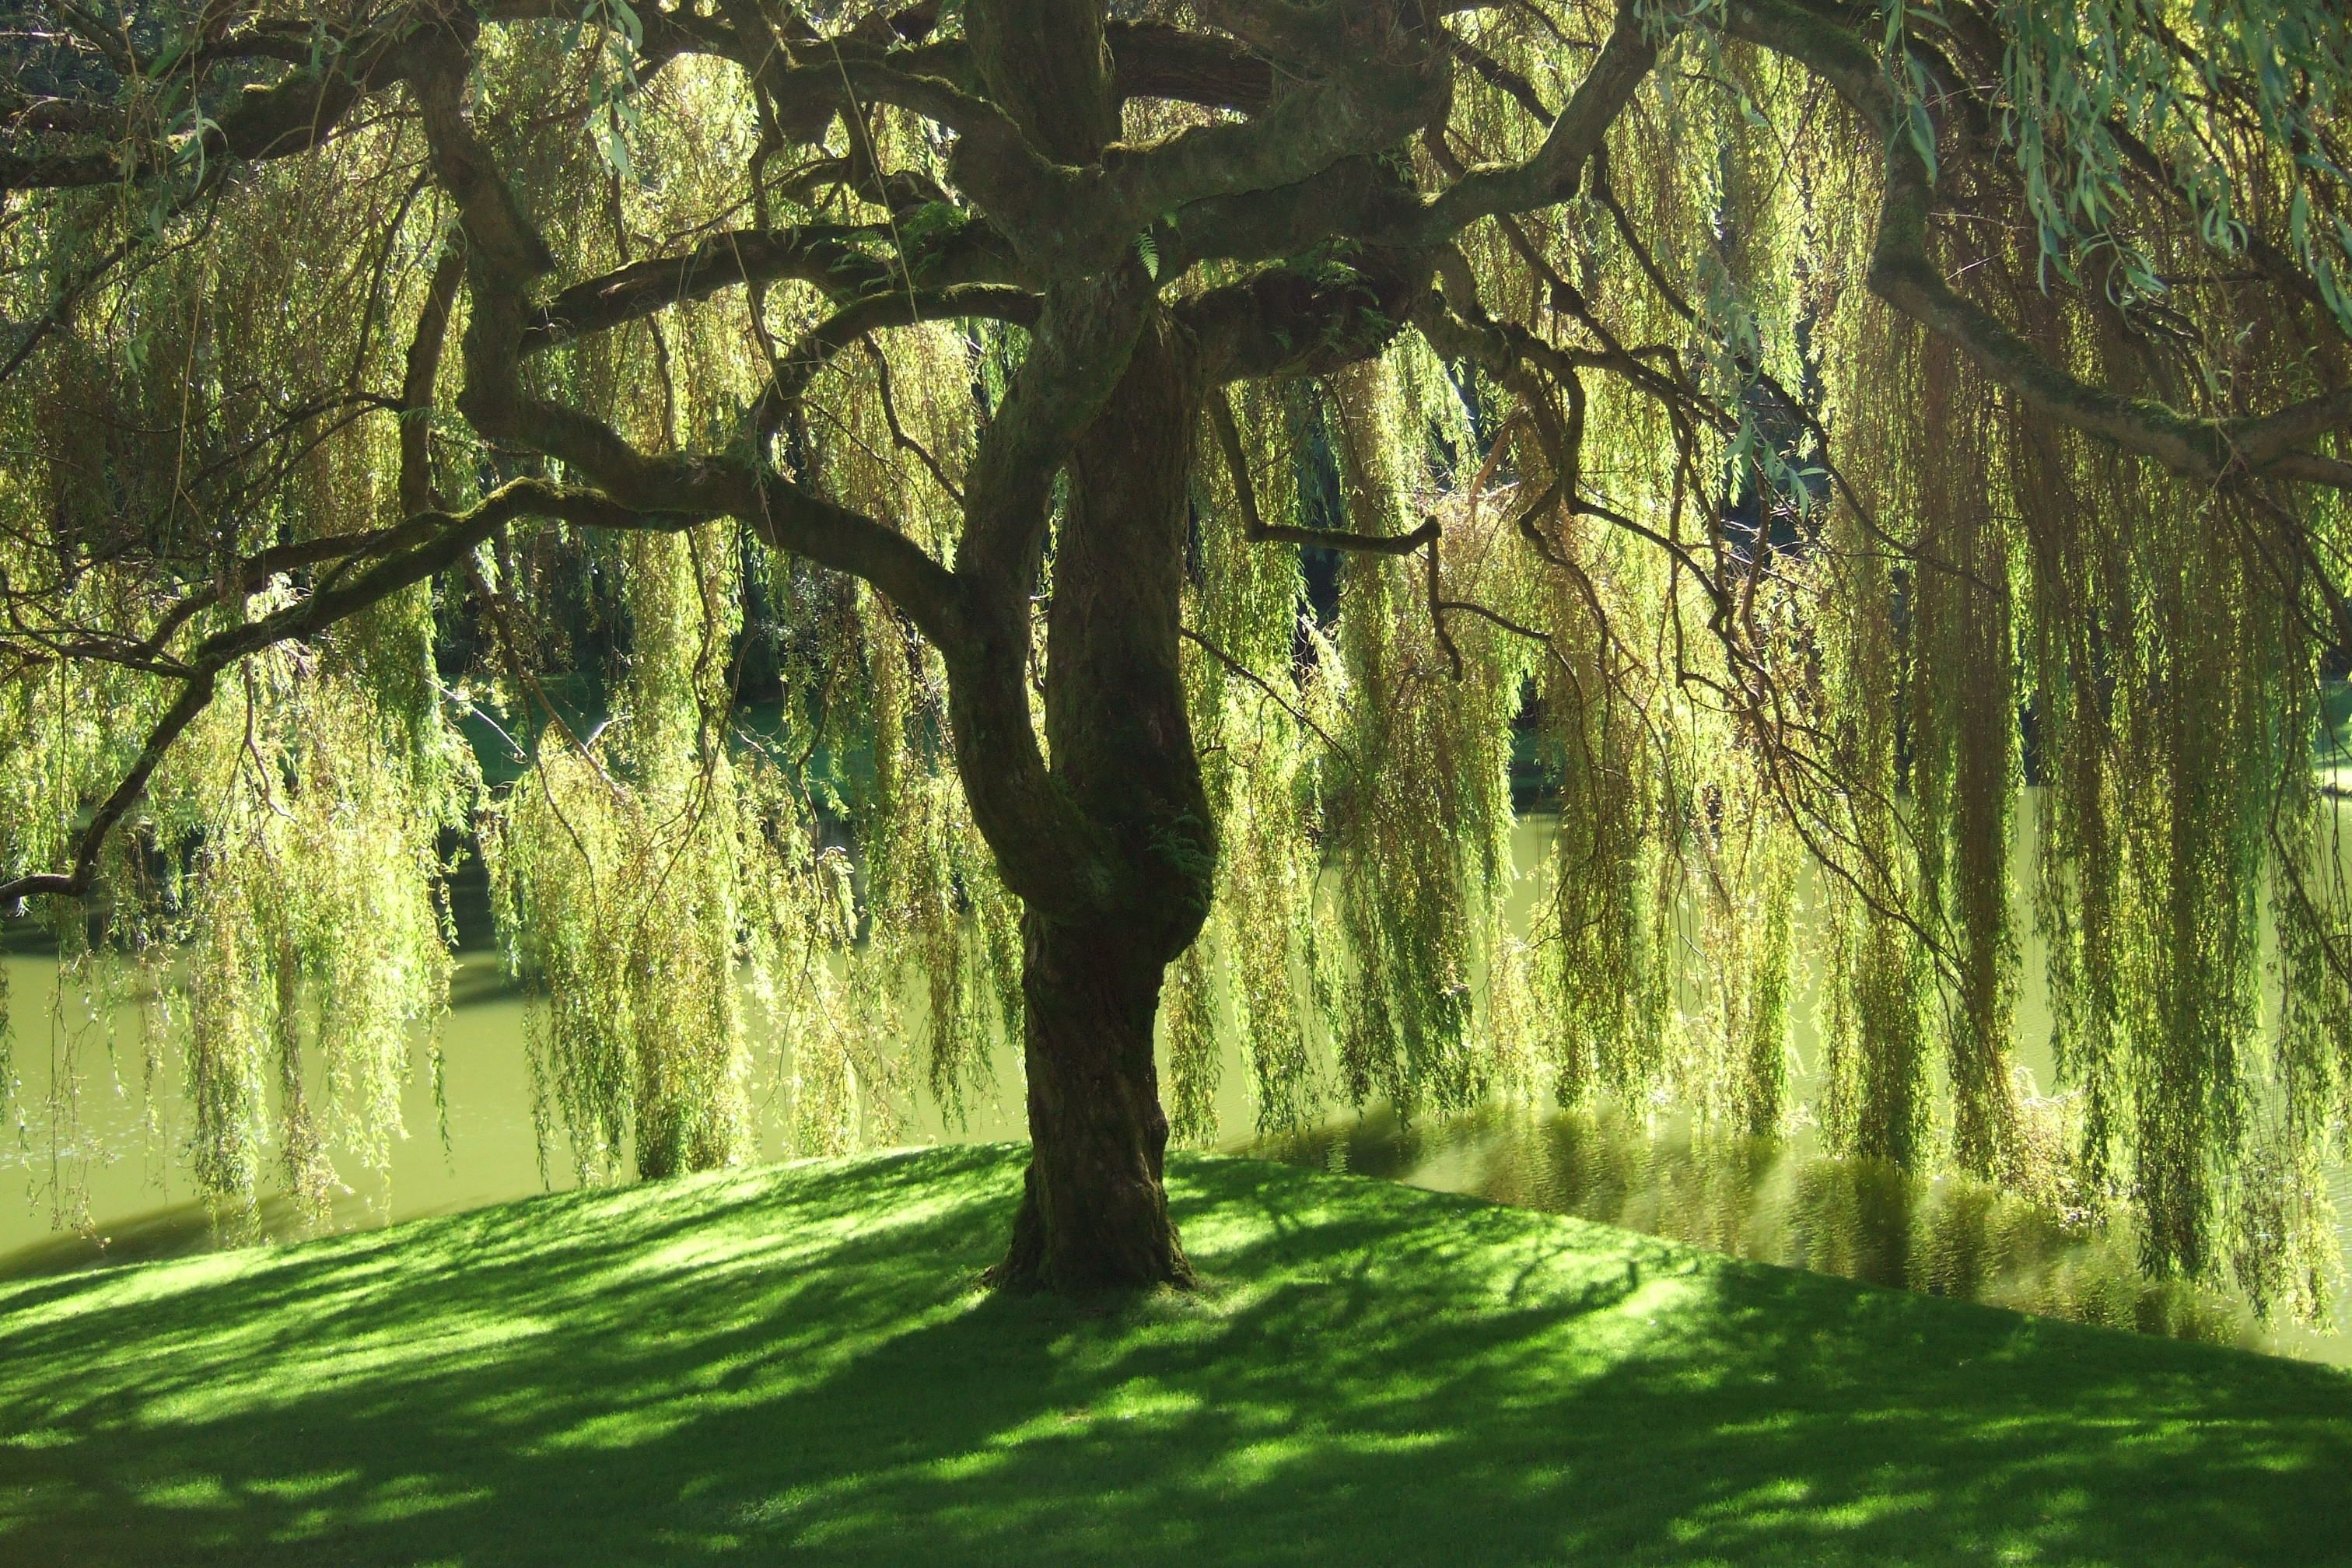 Weeping willow wallpapers, Nature's allure, Serene scenery, Delicate branches, 3030x2020 HD Desktop